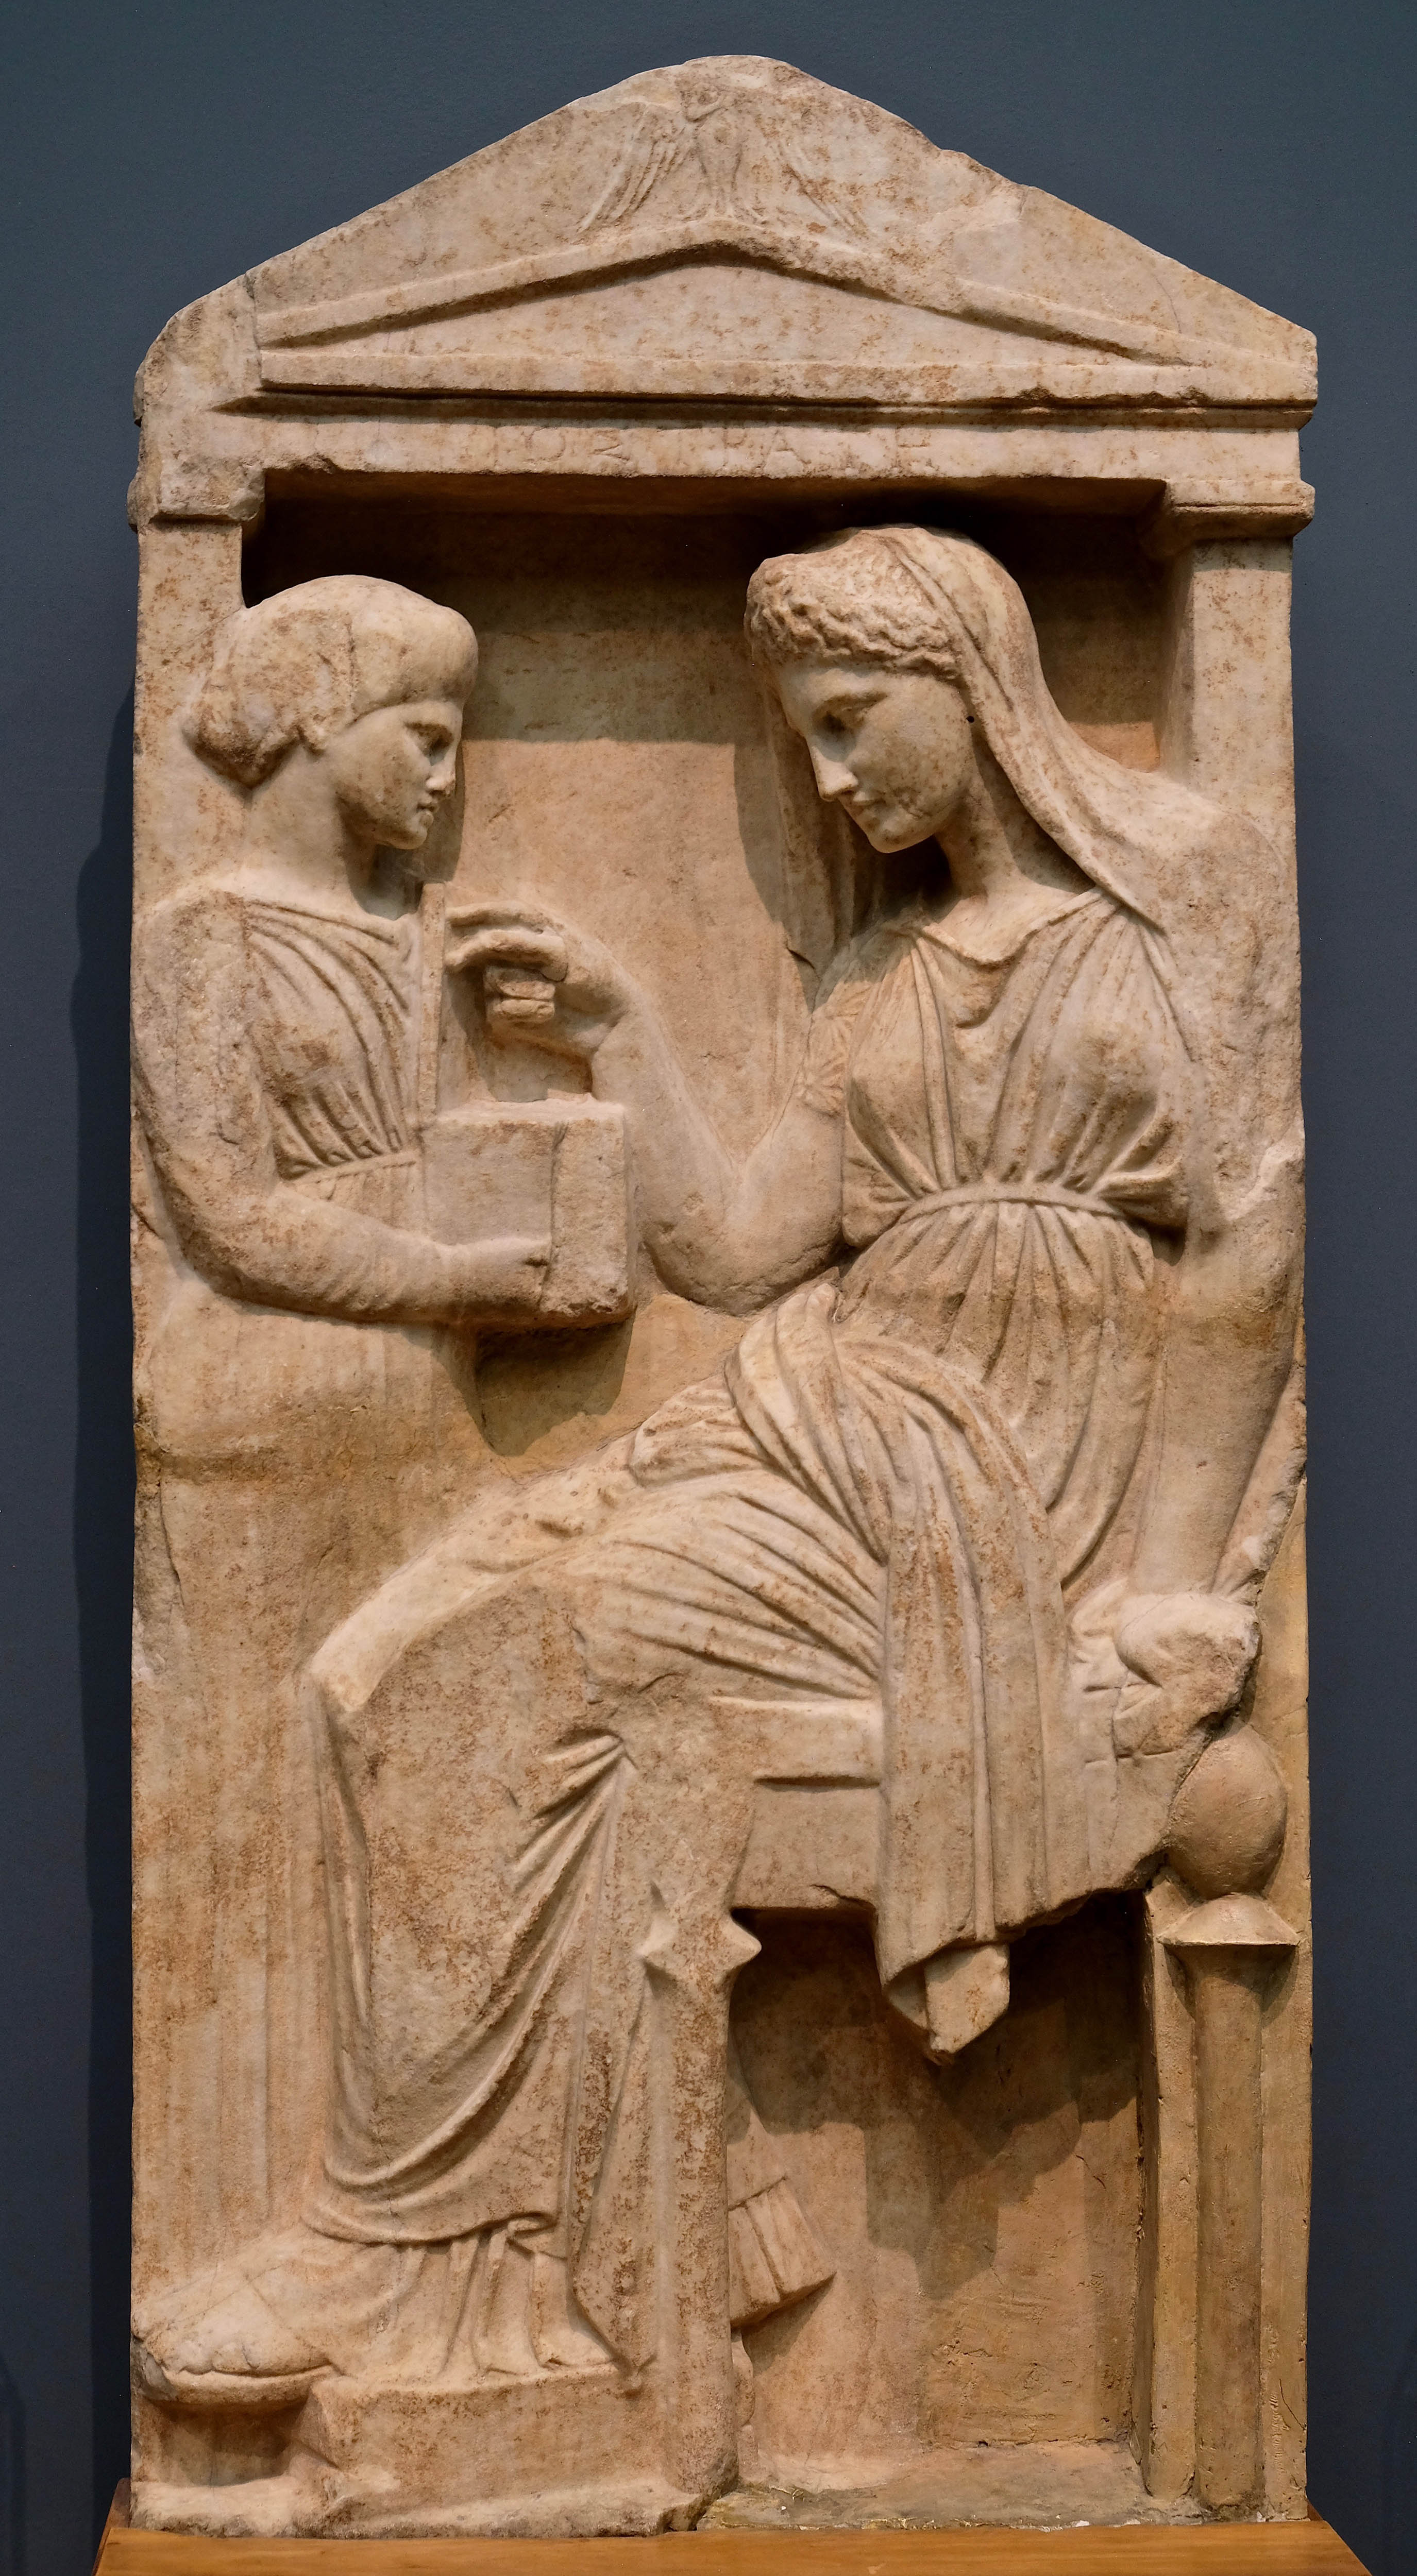 Grave relief of Iostrate, Attic, 4th century BC. Royal Ontario Museum, Toronto.